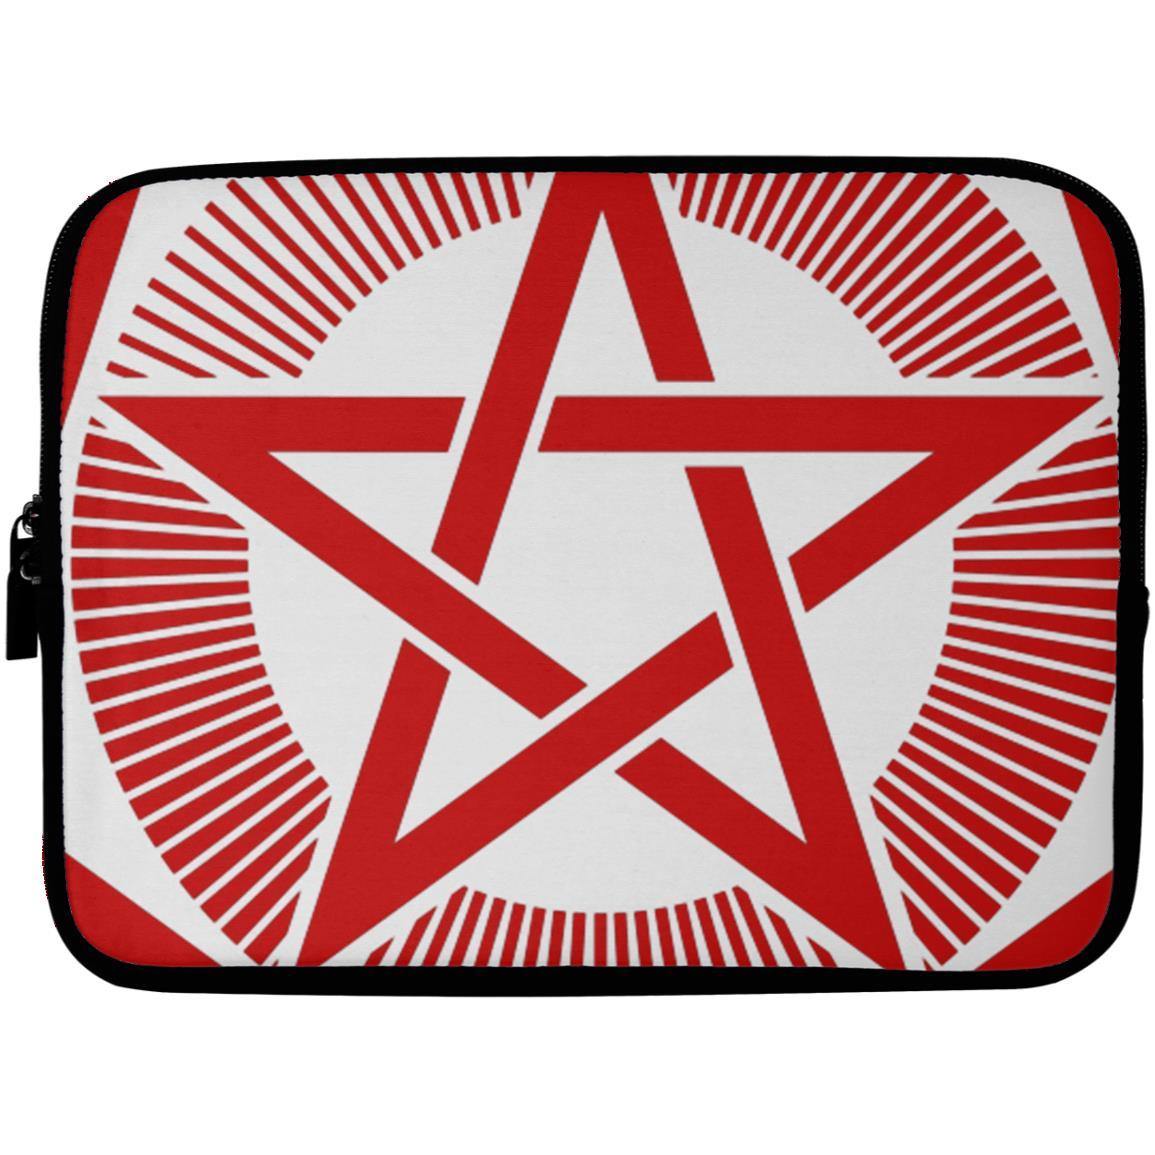 Crop Circle Laptop Sleeve - Barton-Le-Cley - Shapes of Wisdom